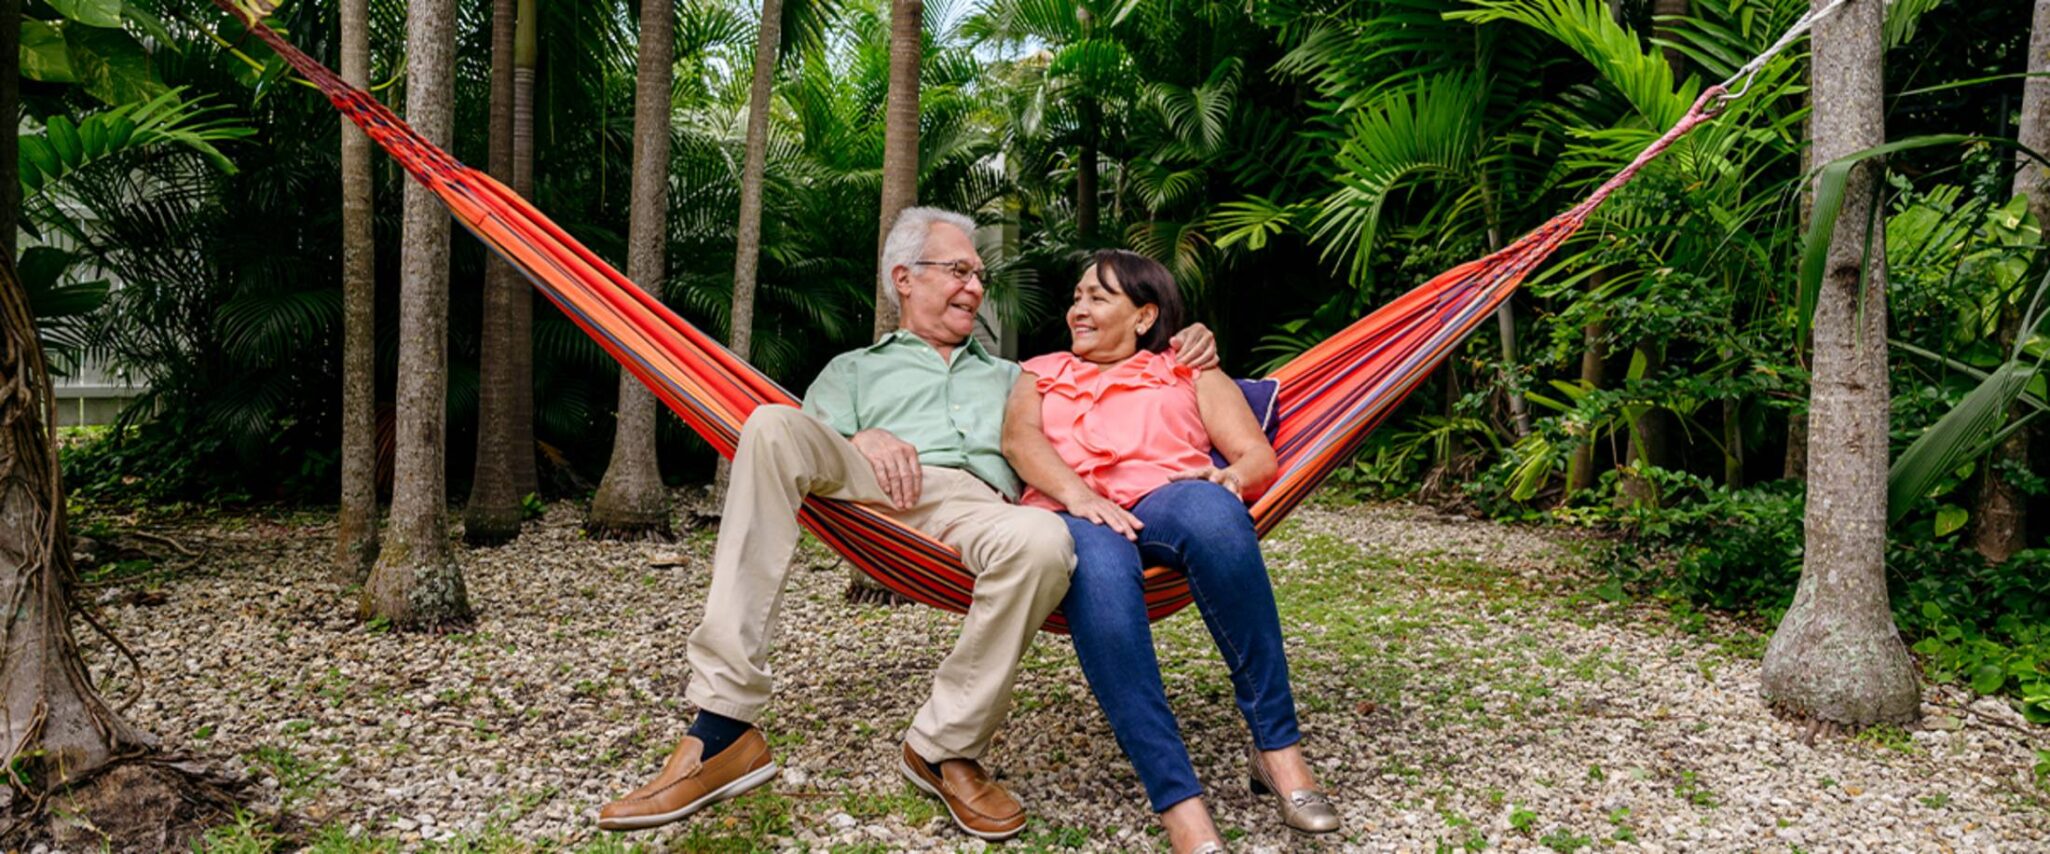 Senior couple enjoying the outdoors in Florida during their retirement.